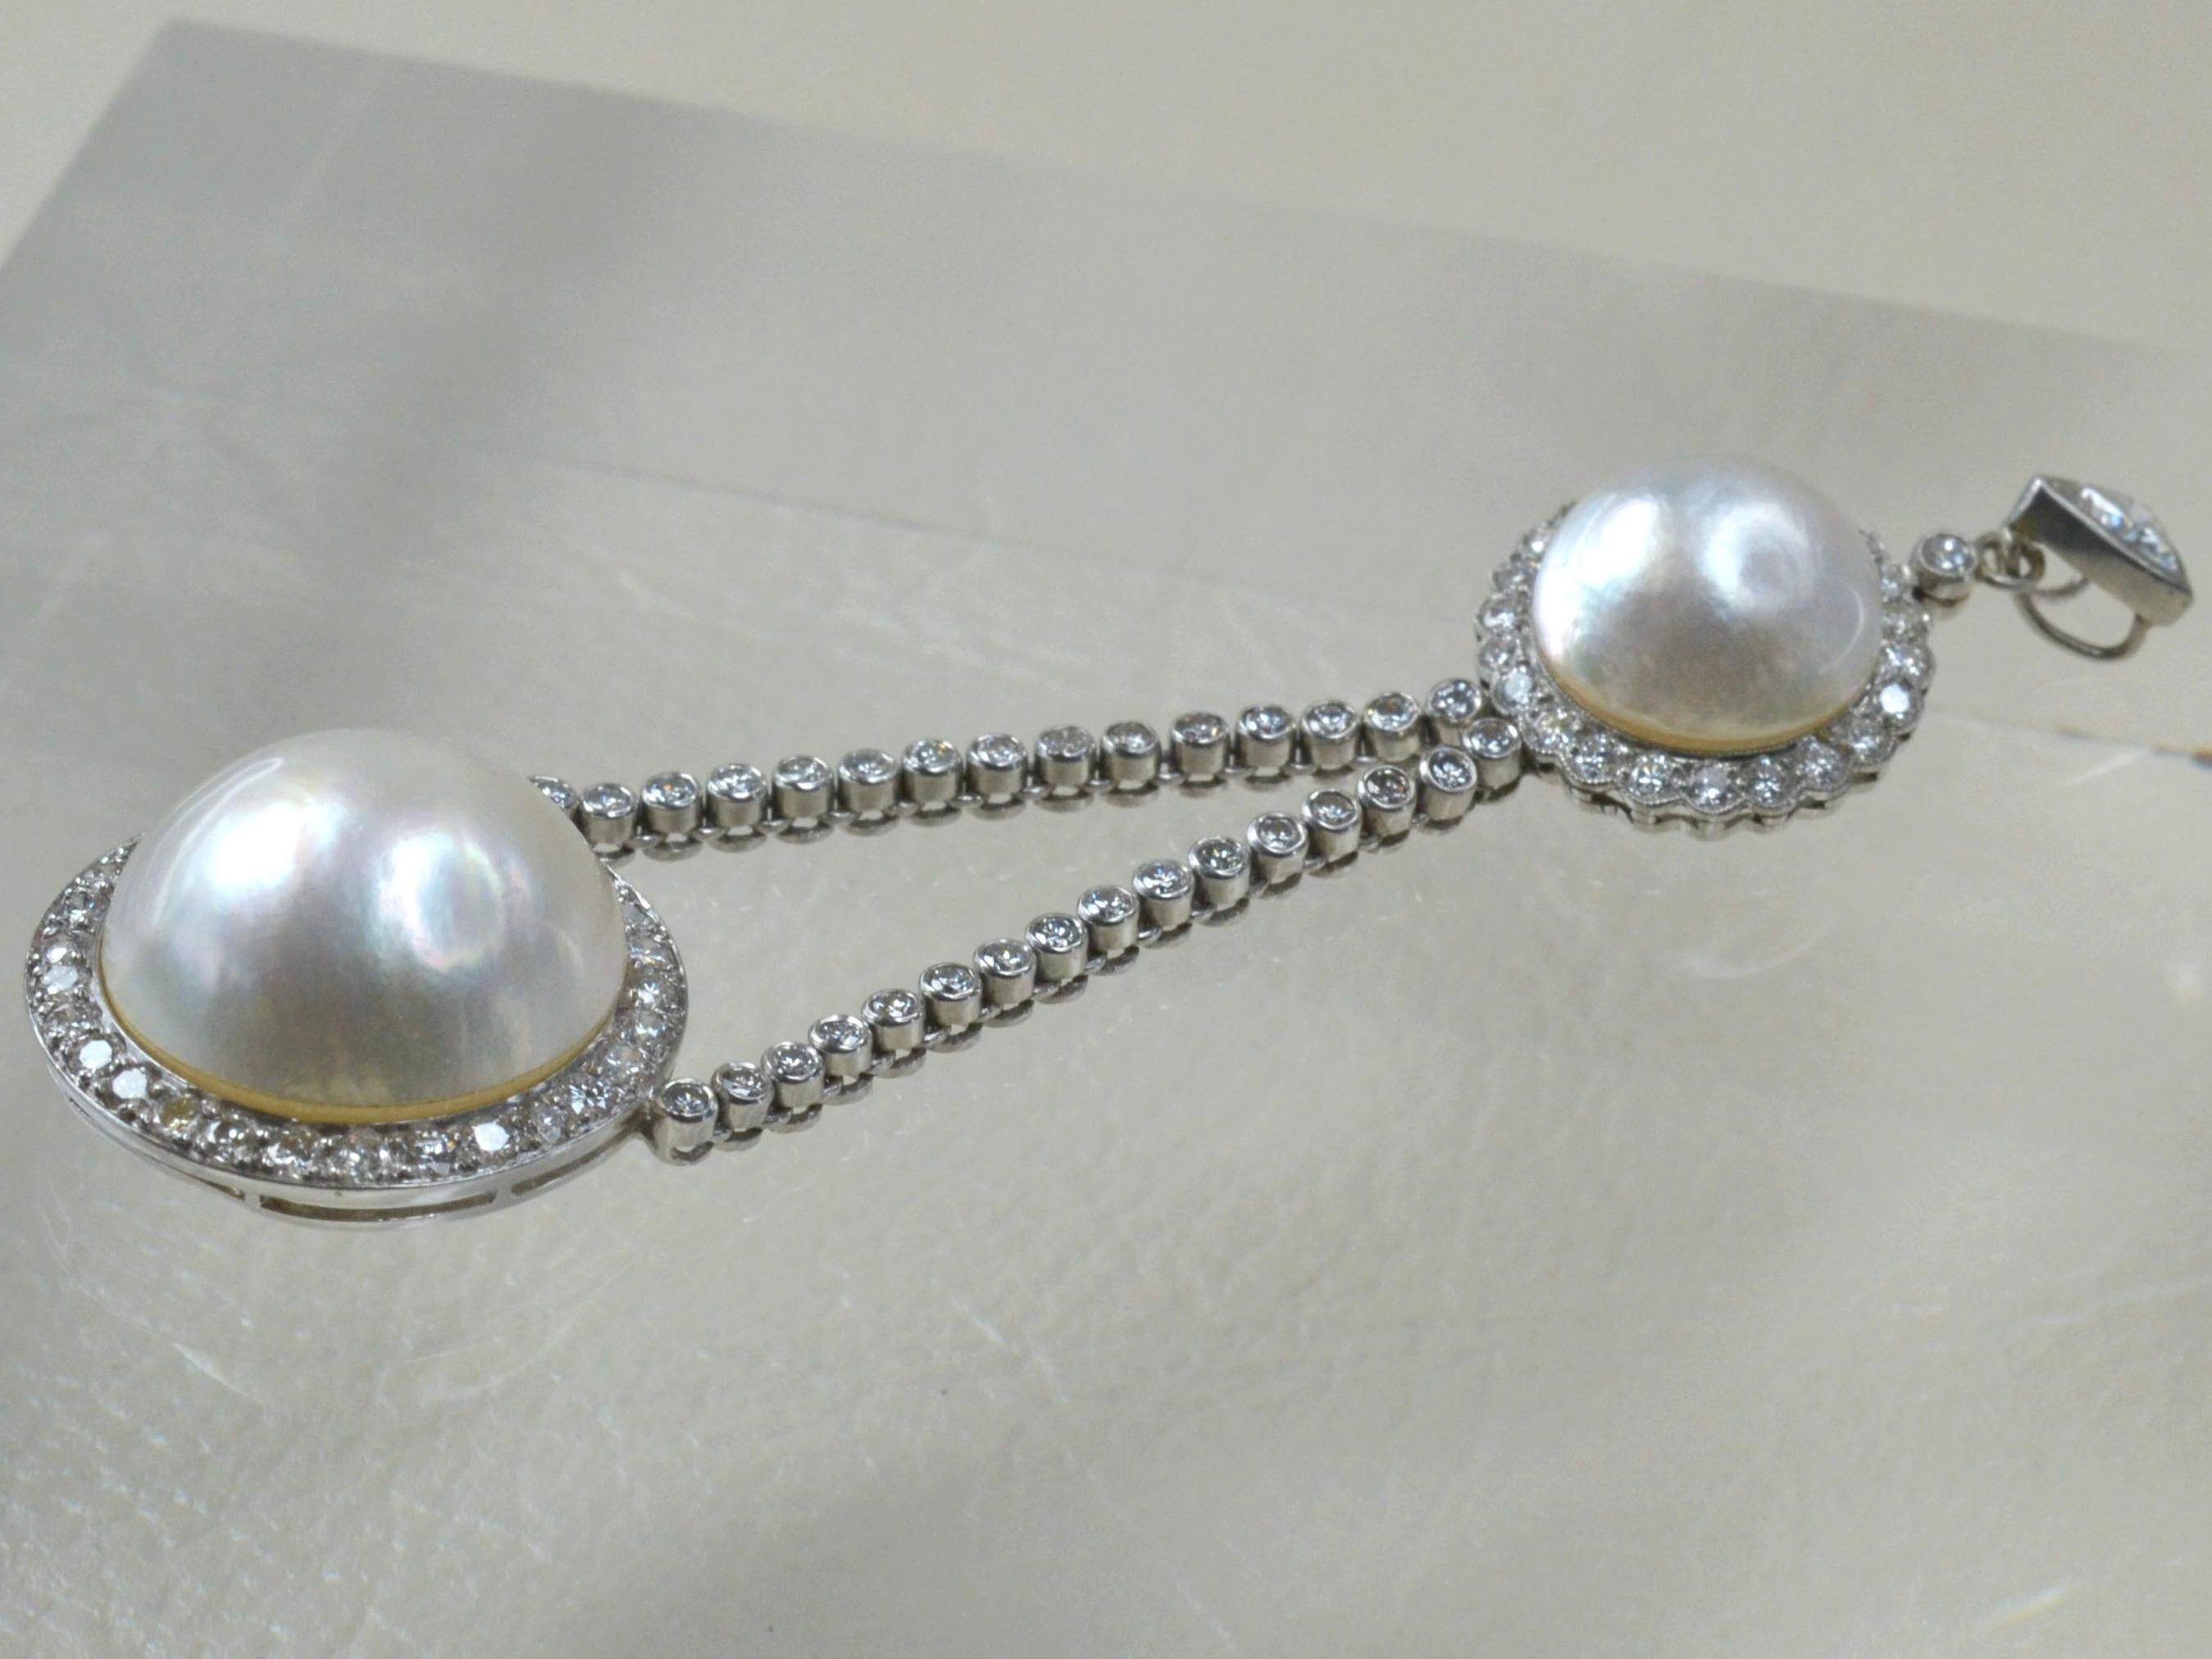 Large, 1970s Piece. Platinum, White Diamond and White, South Sea Double Pearl Pendant. 
Pendant features two large pearls, both halo set with soft, floral edges. Elegant, dazzling piece with movement.

Top smaller halo - Measures 1.5cm diameter.